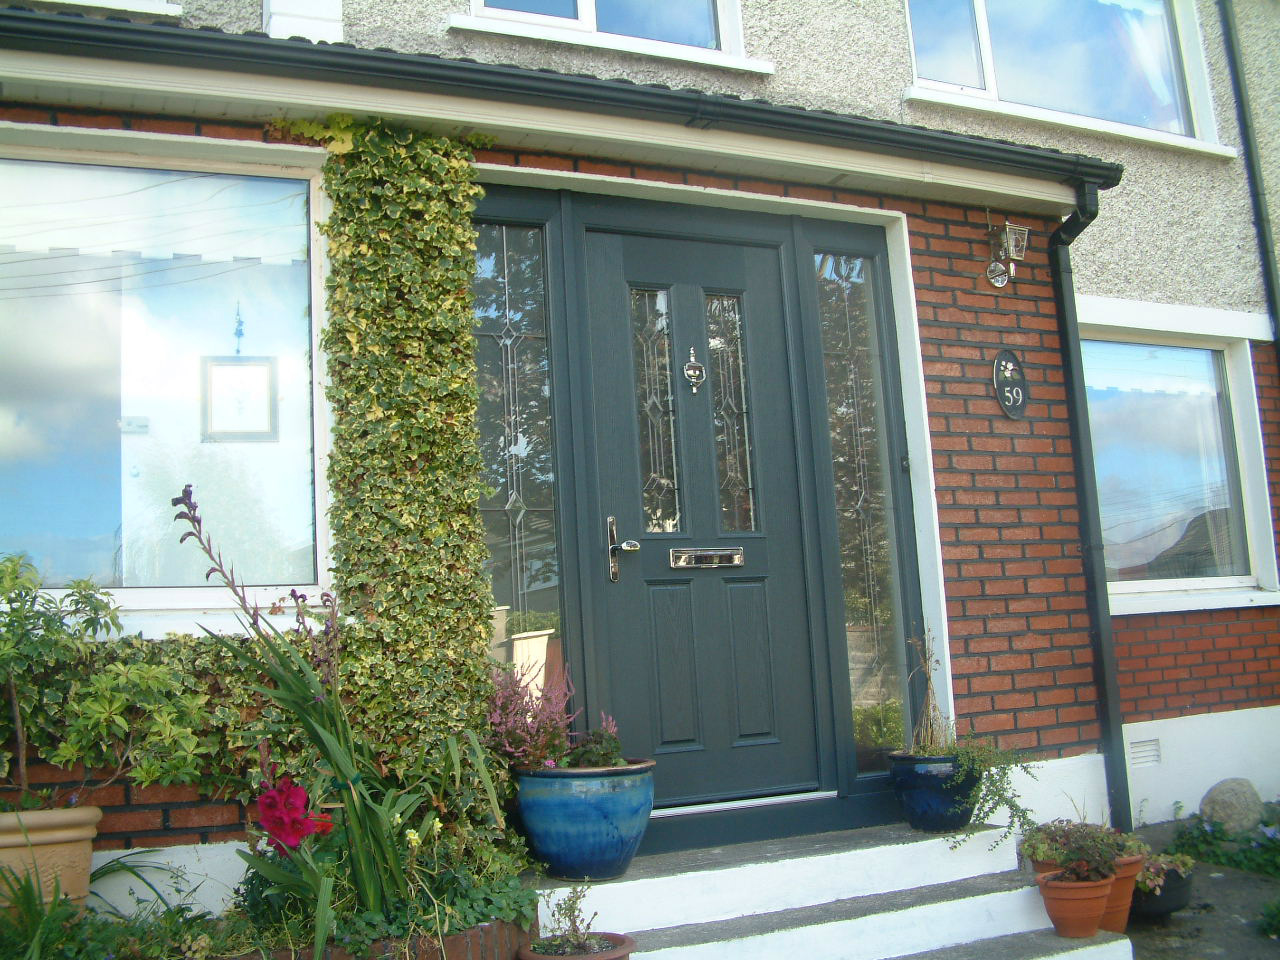 ANTHRACITE GREY APEER APM2 COMPOSITE FRONT DOOR FITTED BY ASGARD WINDOWS IN DUBLIN 16.